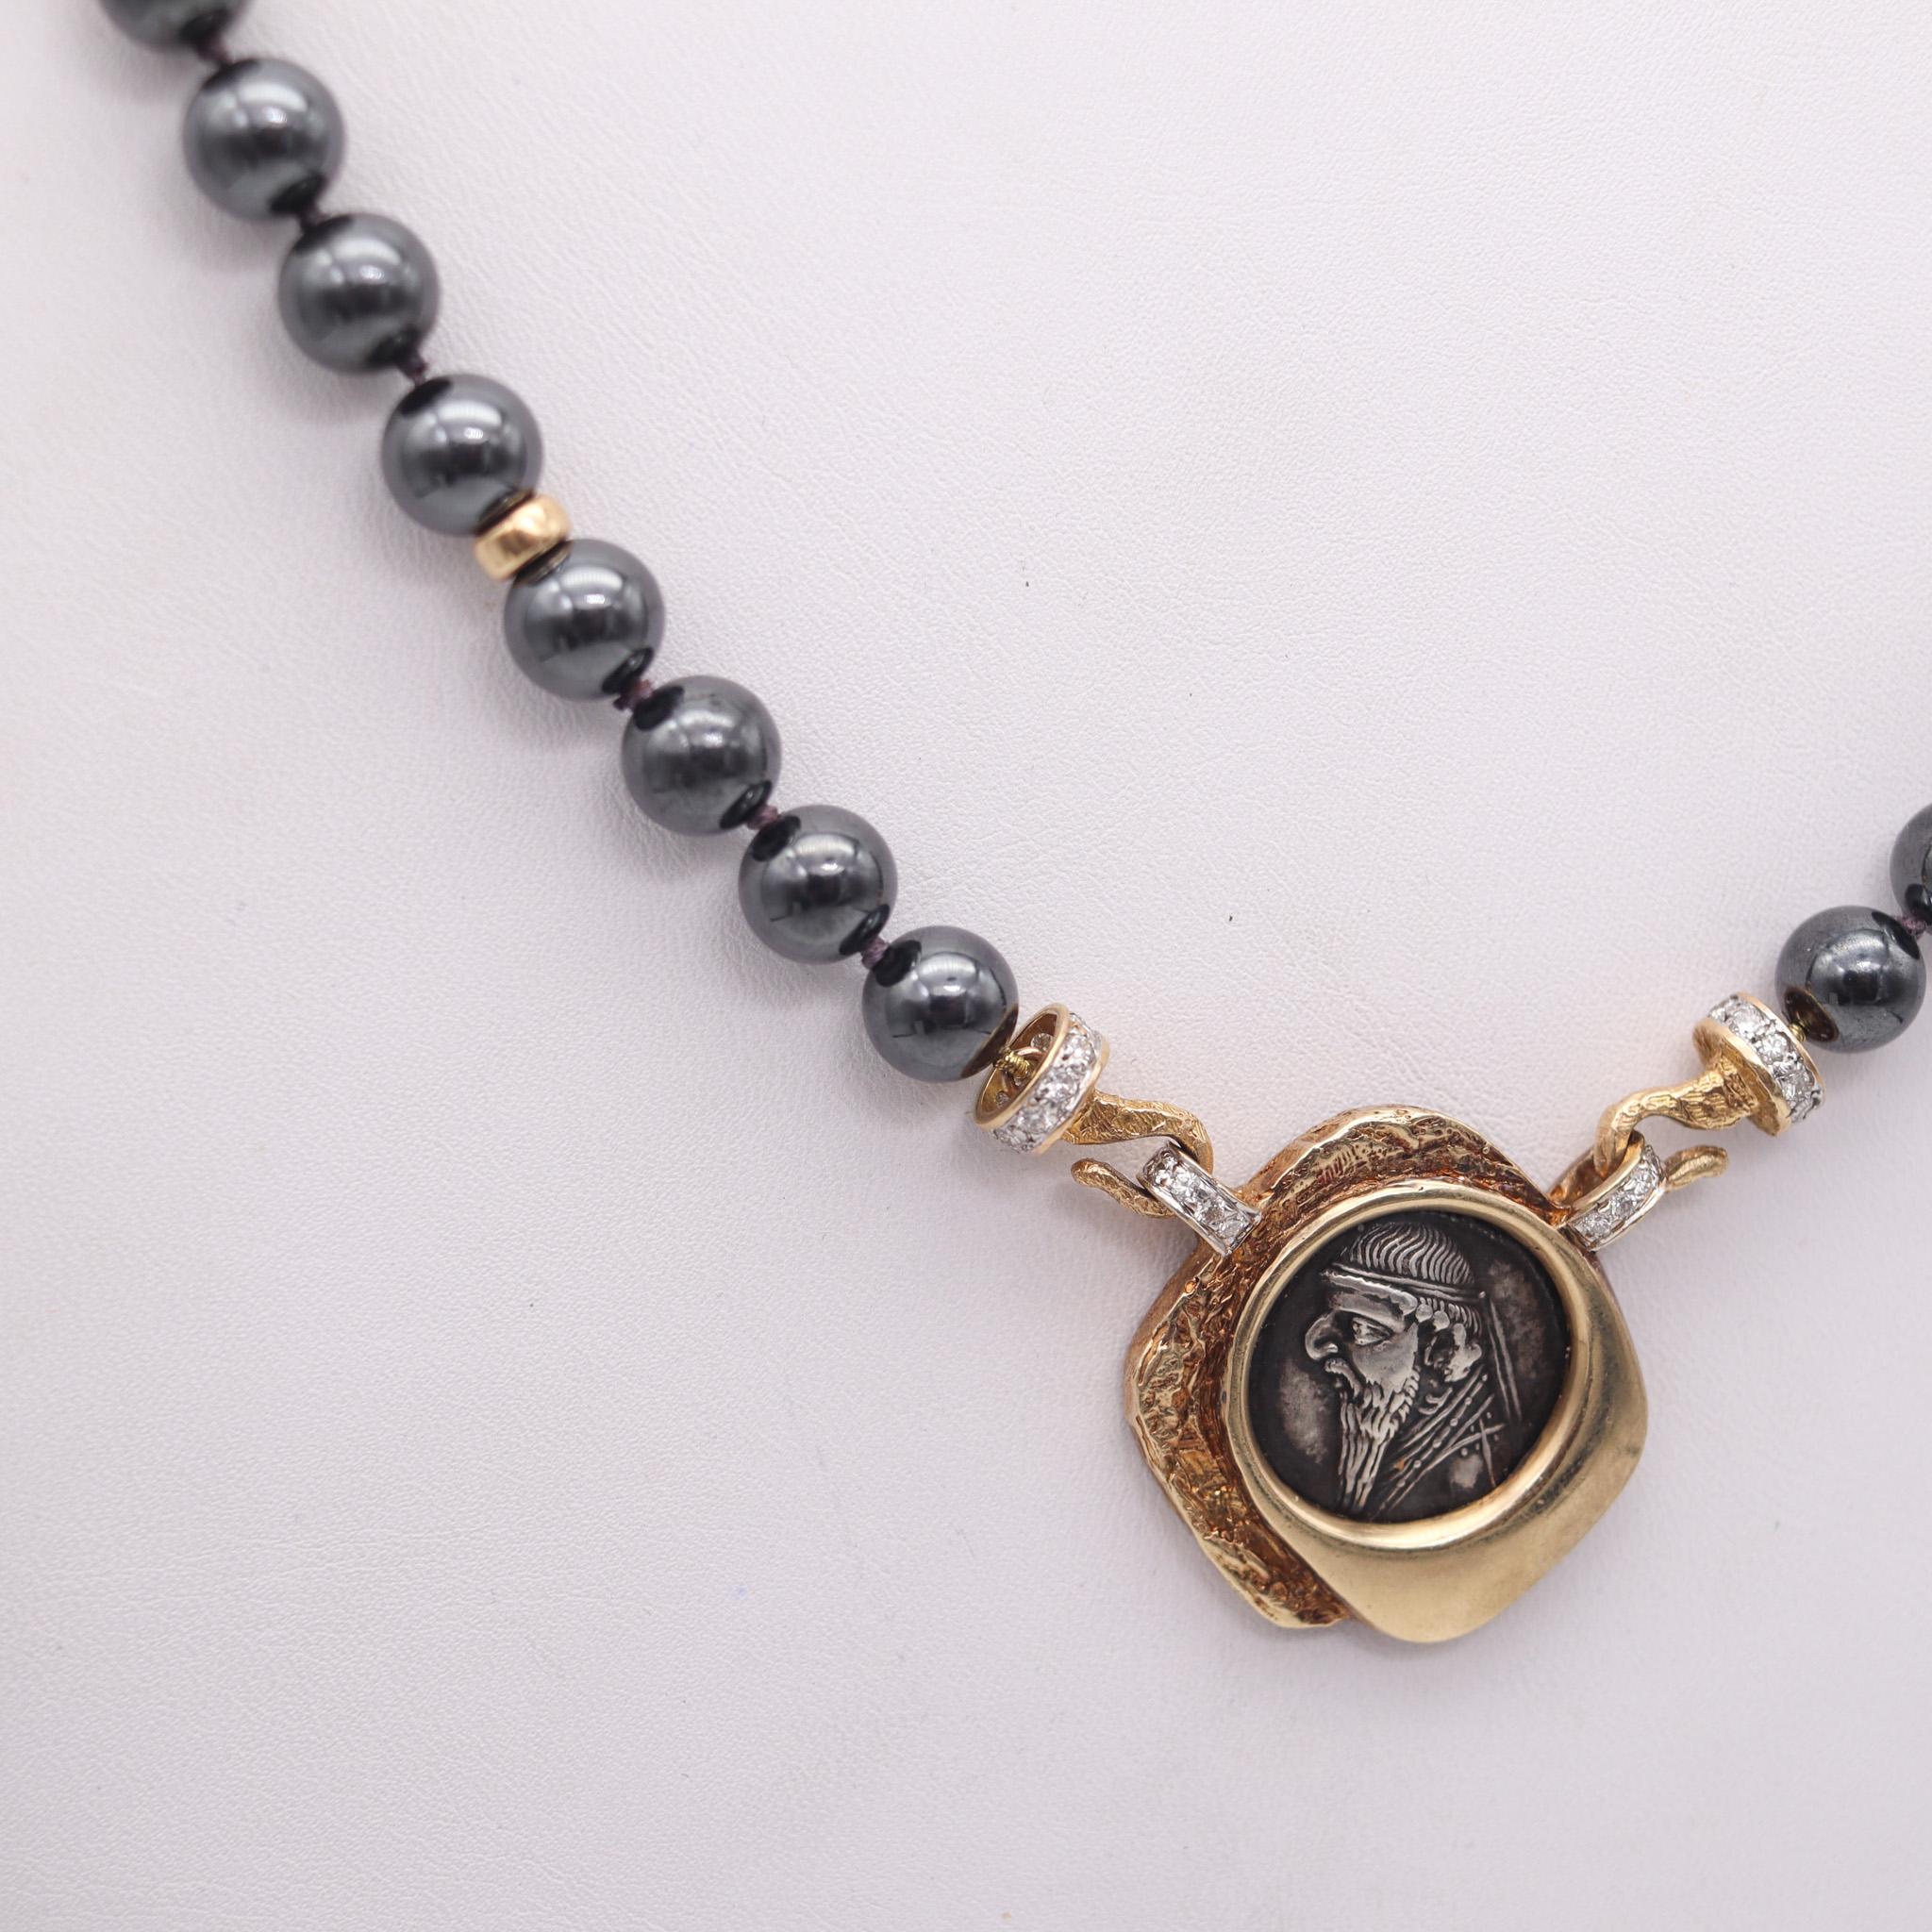 Necklace with a 123 BC ancient coin from the Parthian Kingdom.

Gorgeous coin necklace, mounted with a genuine silver coin from the Parthian Kingdom. The coin is a silver Drachm of 19.5mm from the period of the king Mithradates II, struck between